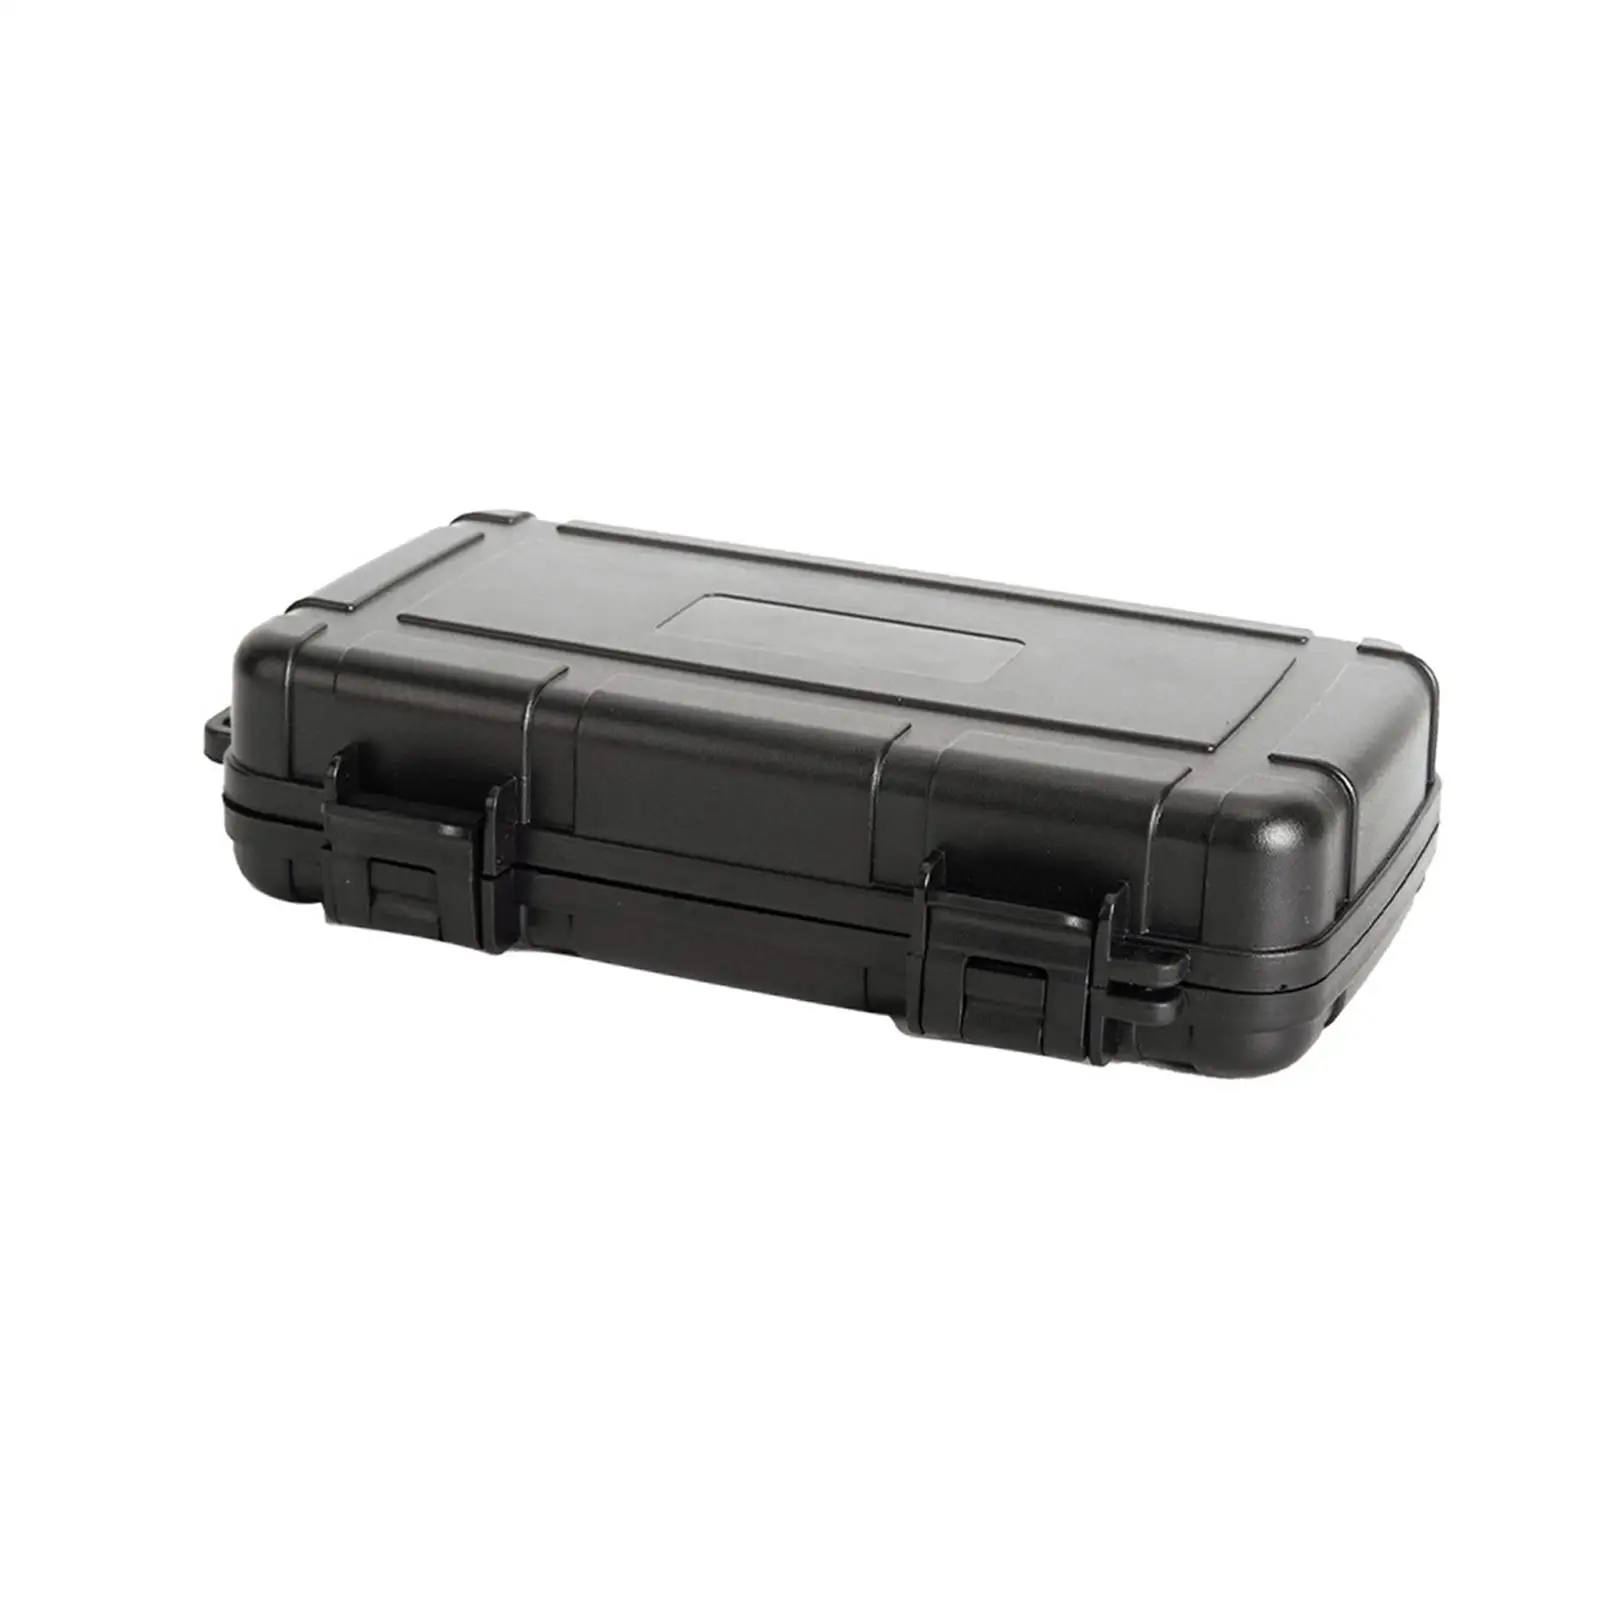 Tool Case Storage Box with Sponge Carrying Anti Impact Shockproof Hardware Organizer for Warehouse Instrument Camera Gear